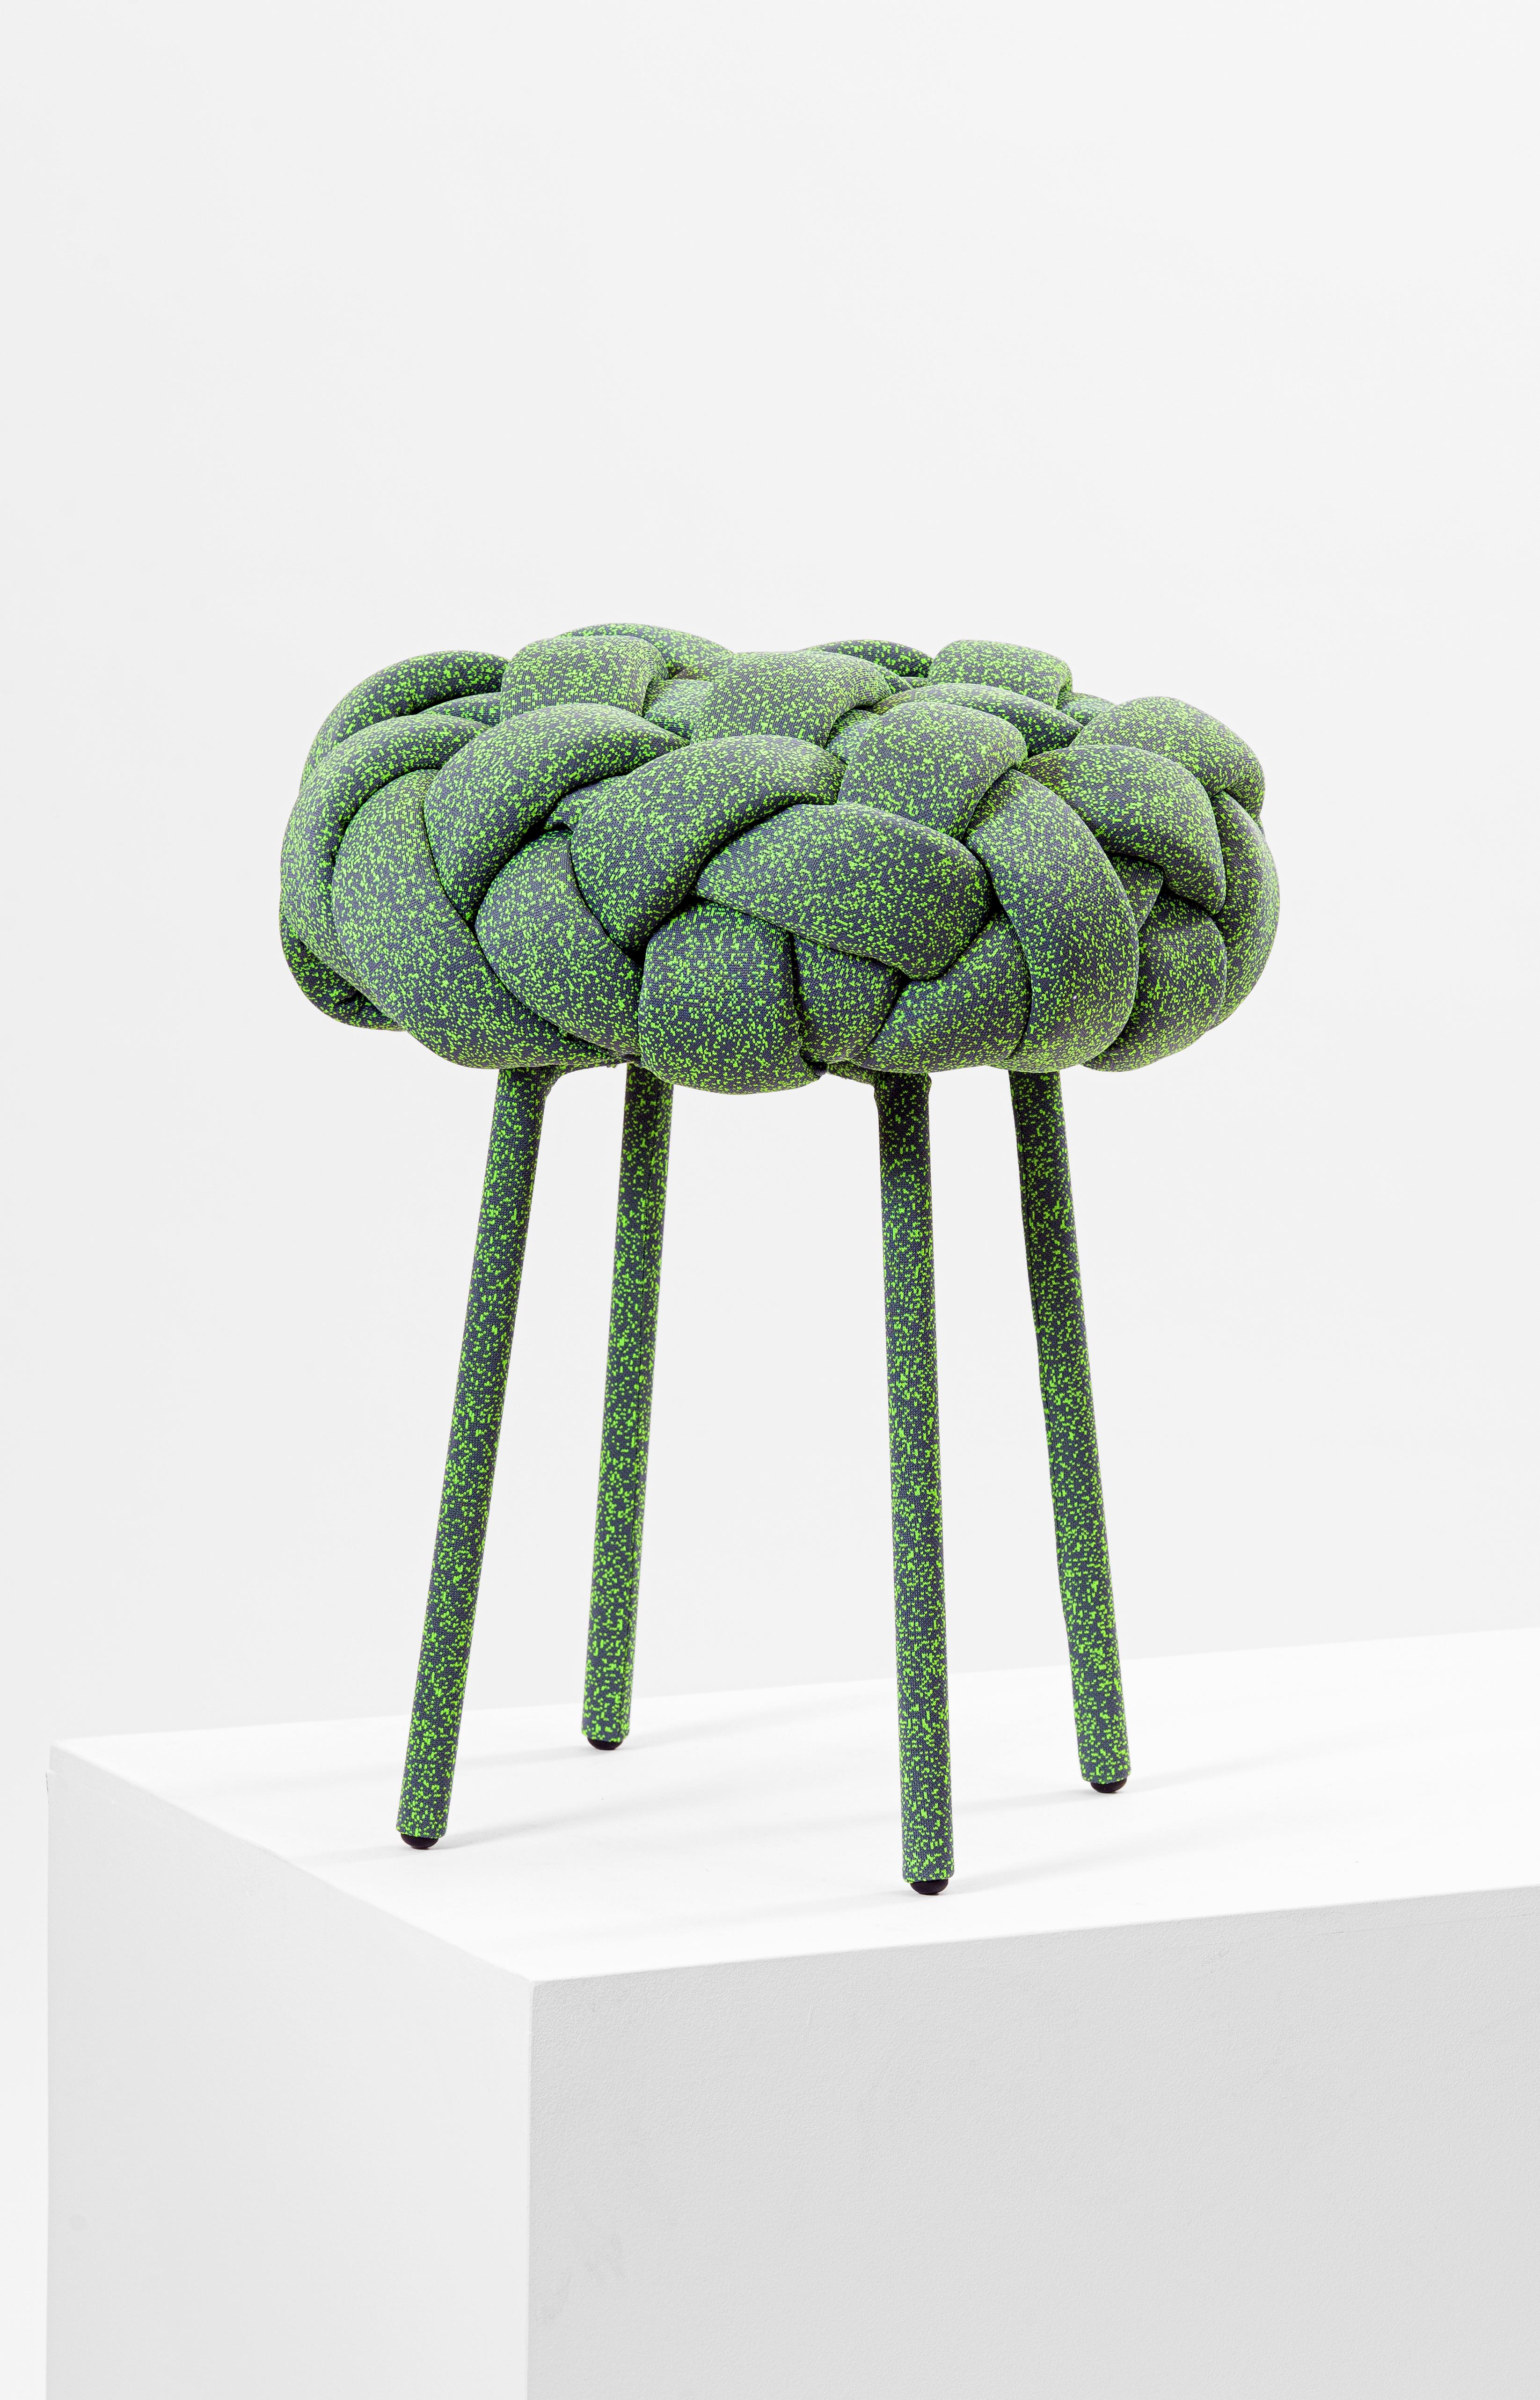 This contemporary stool is part of the Cloud collection, which was created around the concept of weft. These contemporary stools and benches are made with fabric and foam stripes, woven and stitched by hand. Each piece is unique, as the result of